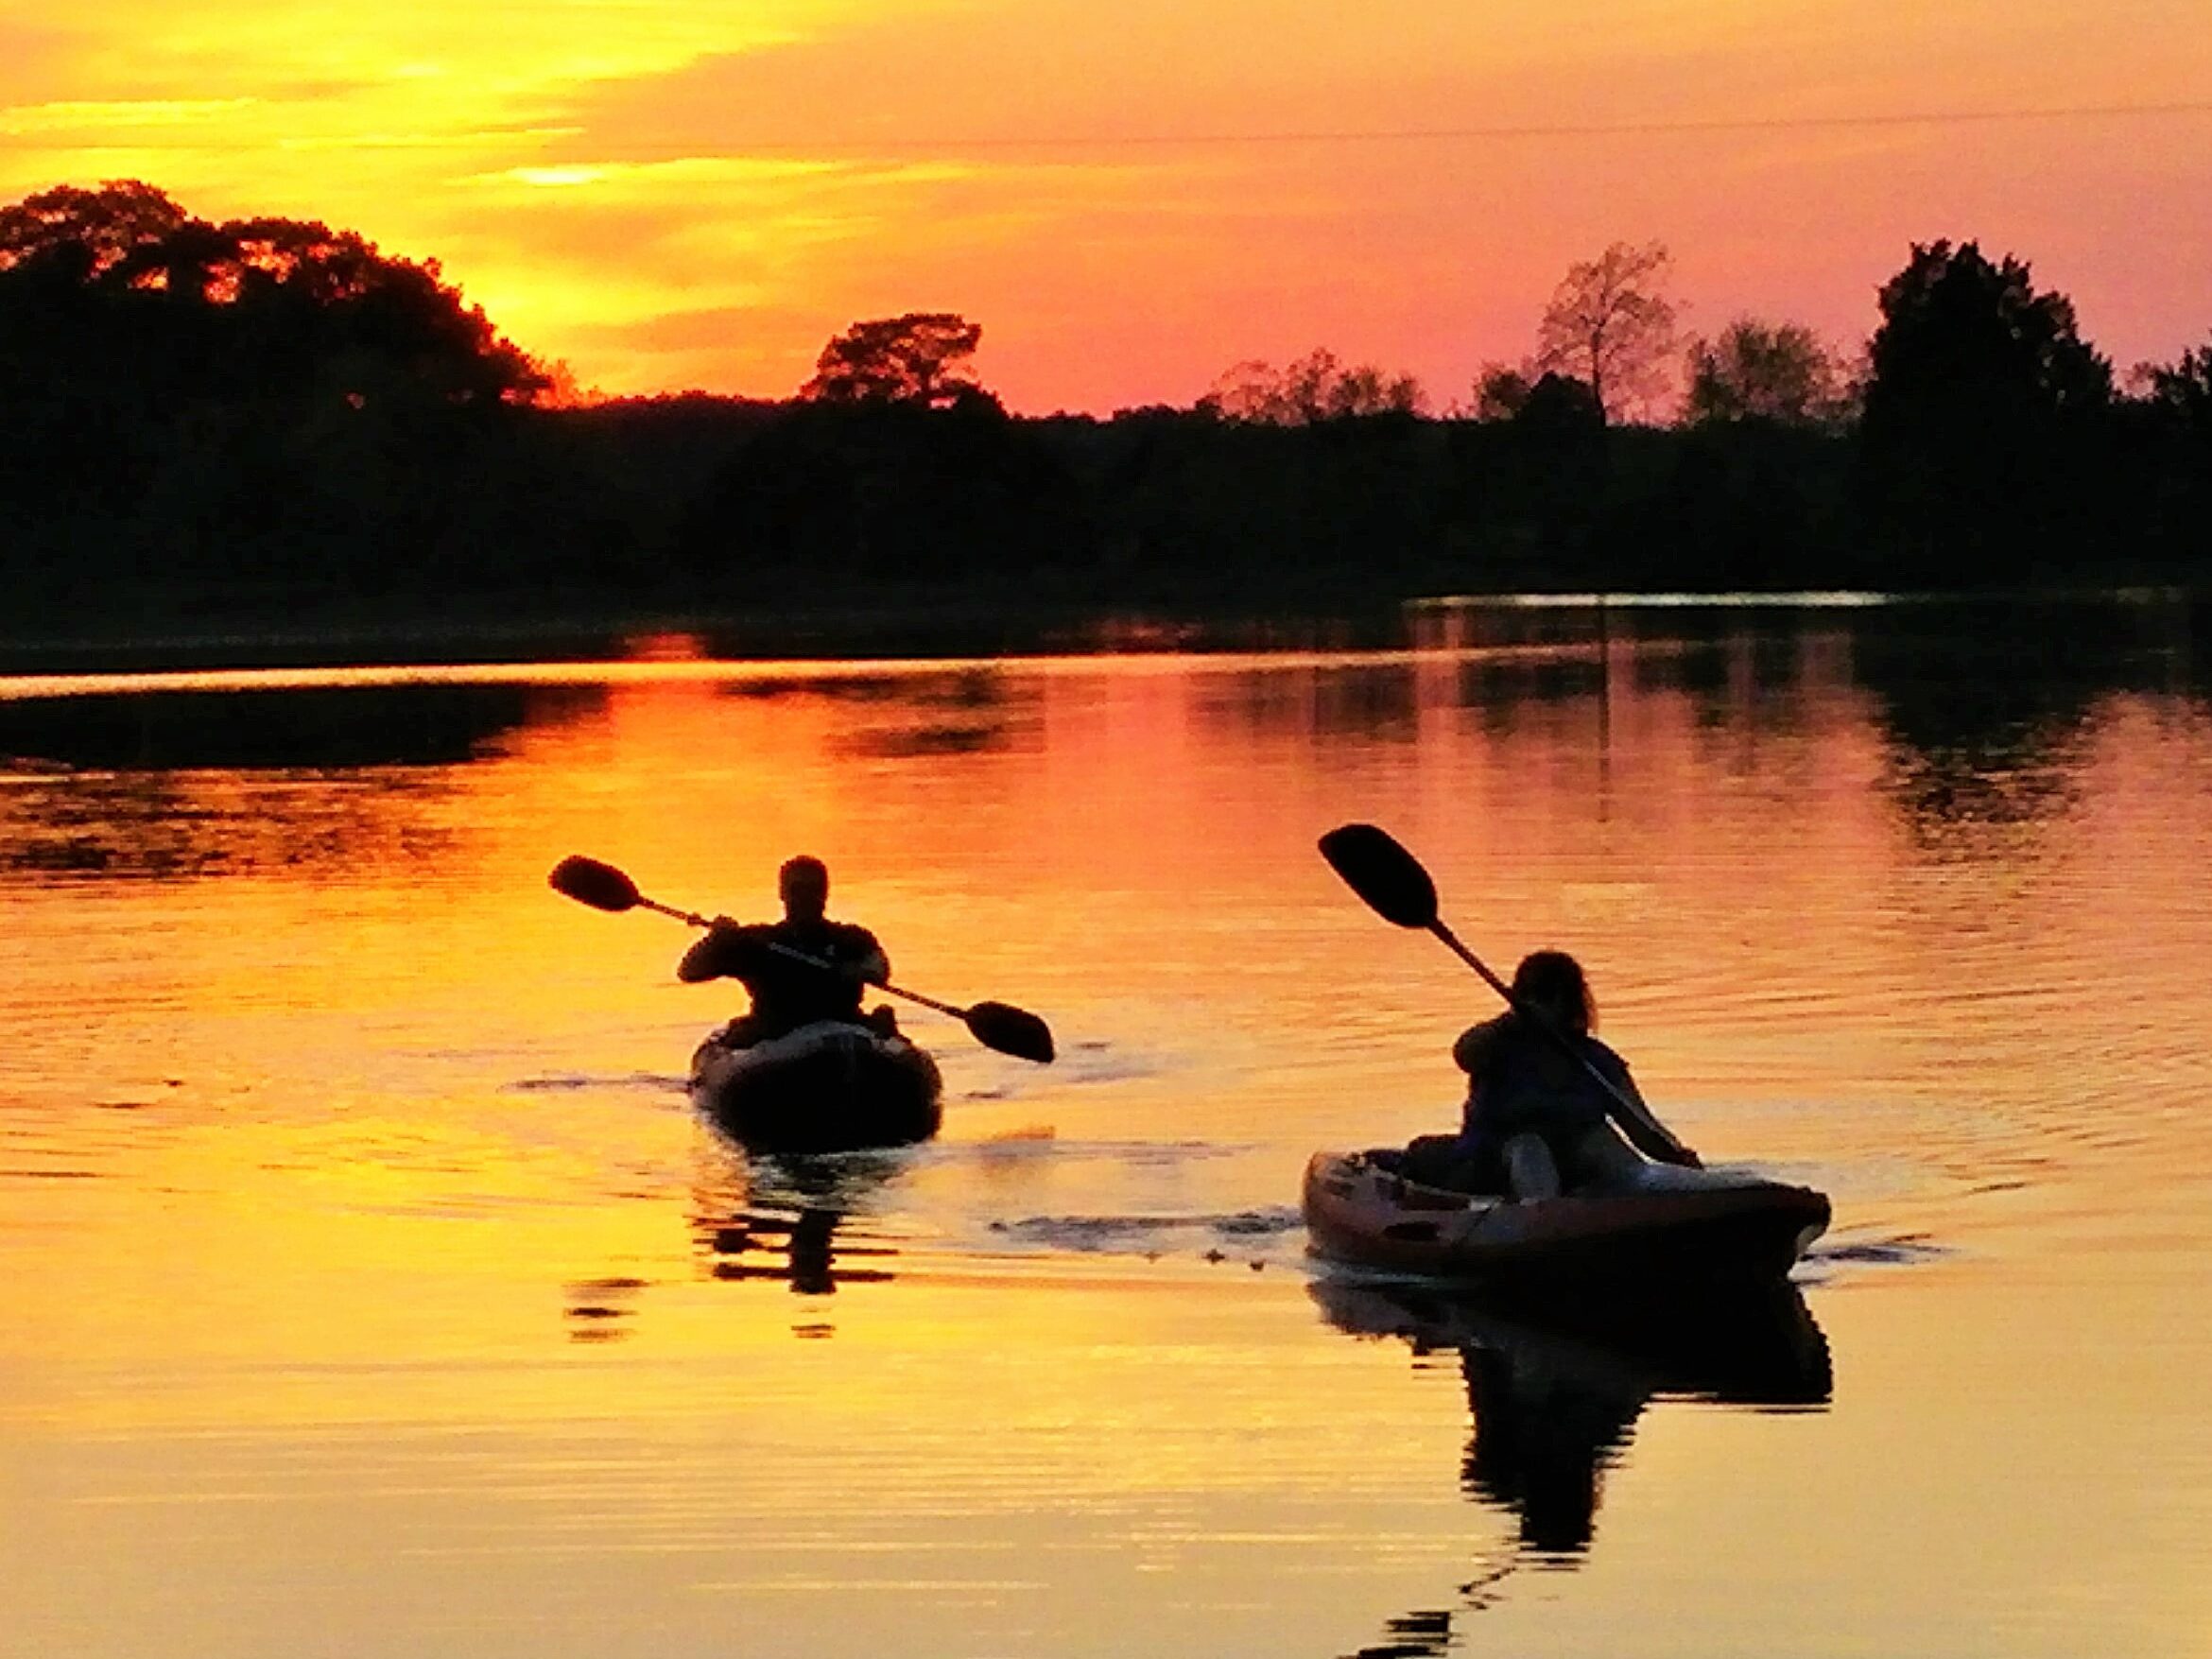 Kayakers finishing their paddle just as the sun finishes setting.